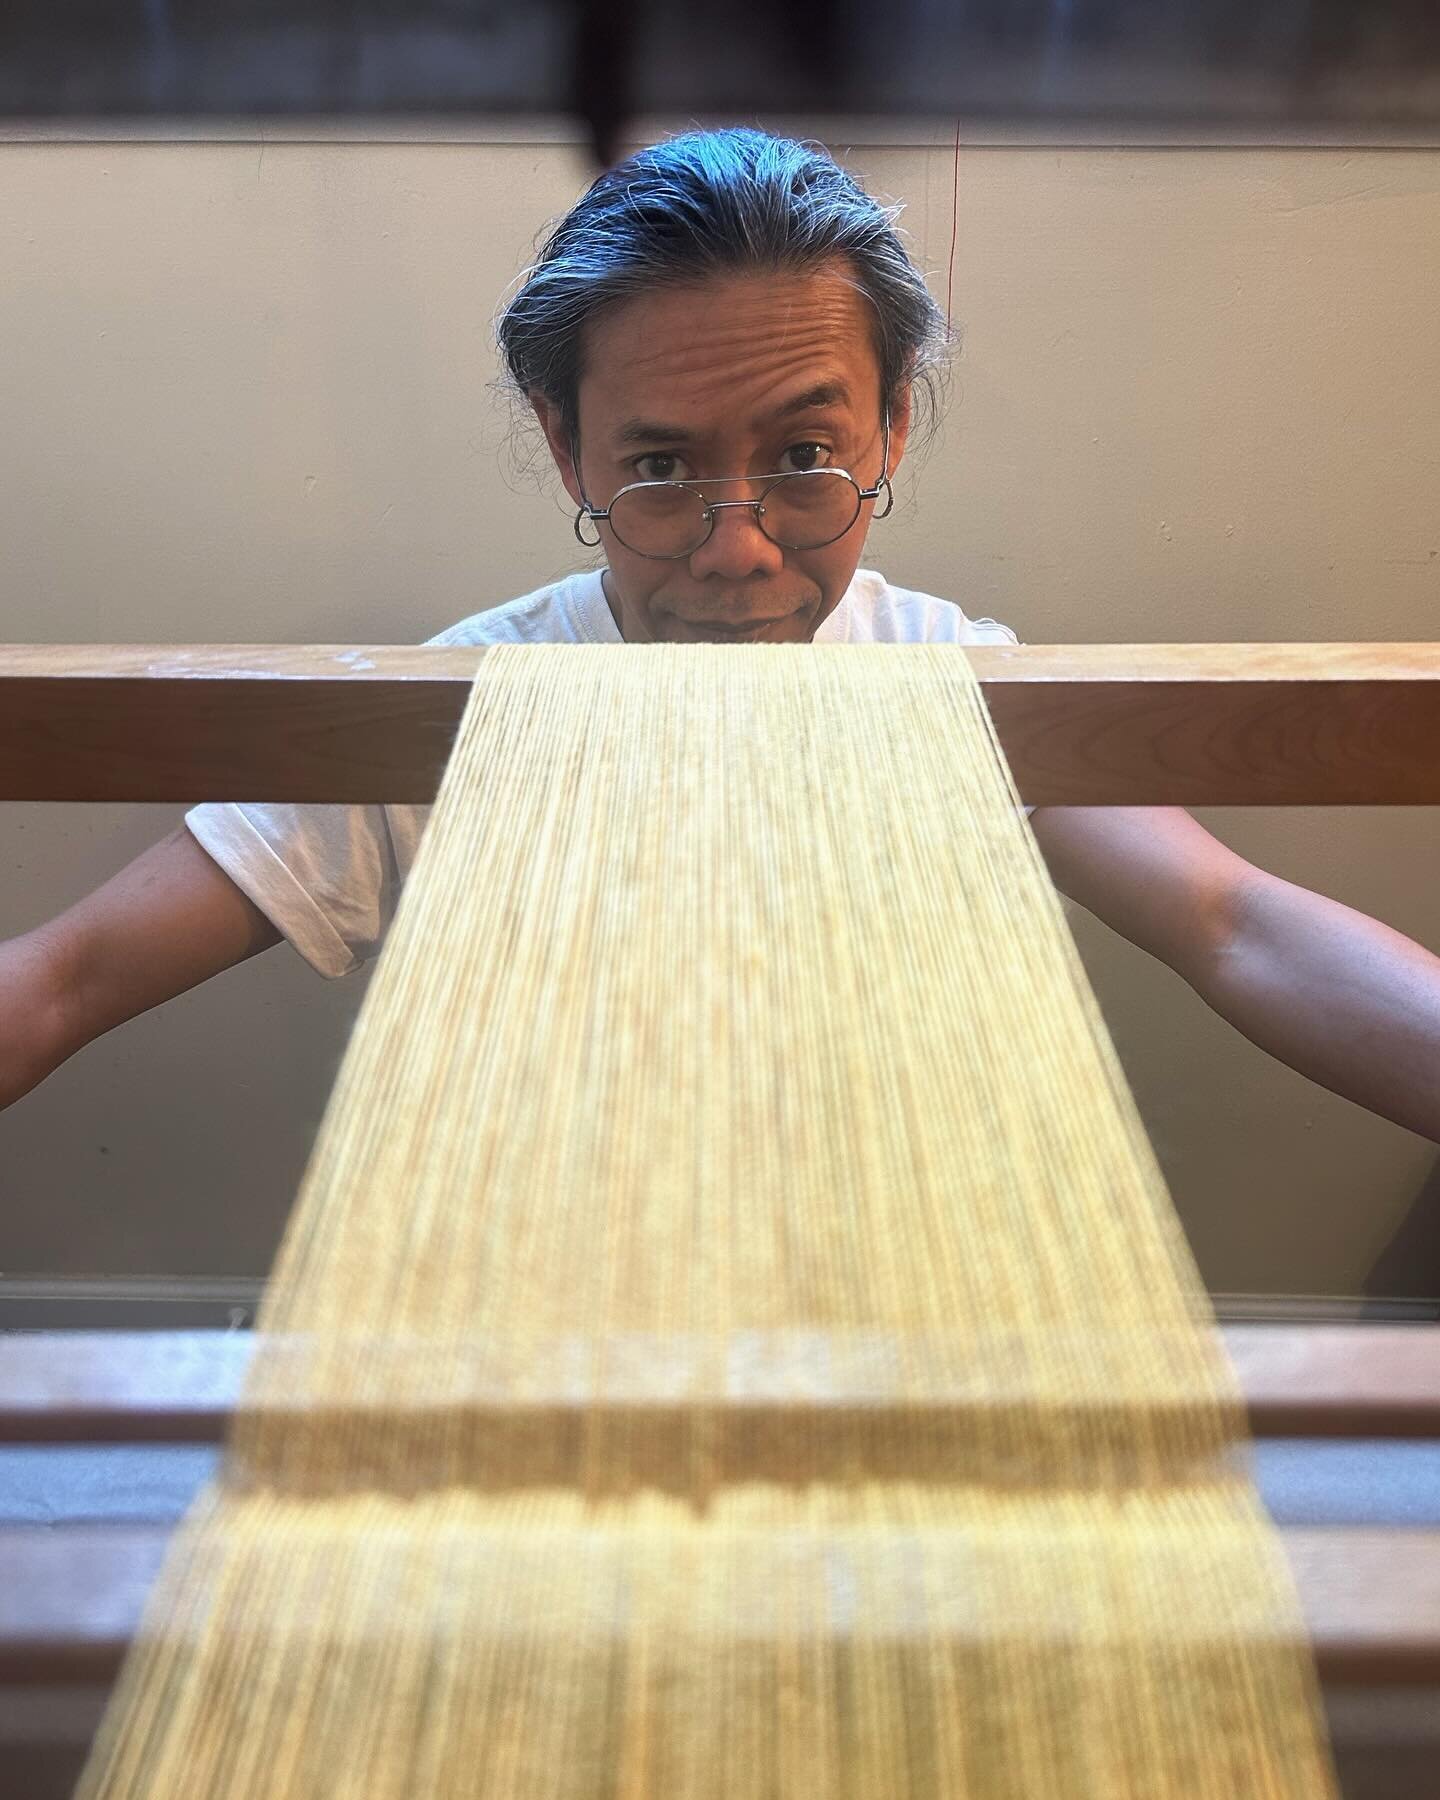 caught in the act!! of beaming 
#weavingassistant #yarnhusband #textiles 
#textileart #weaving #loom #yarn #fiber #wool 
#handsomeguy